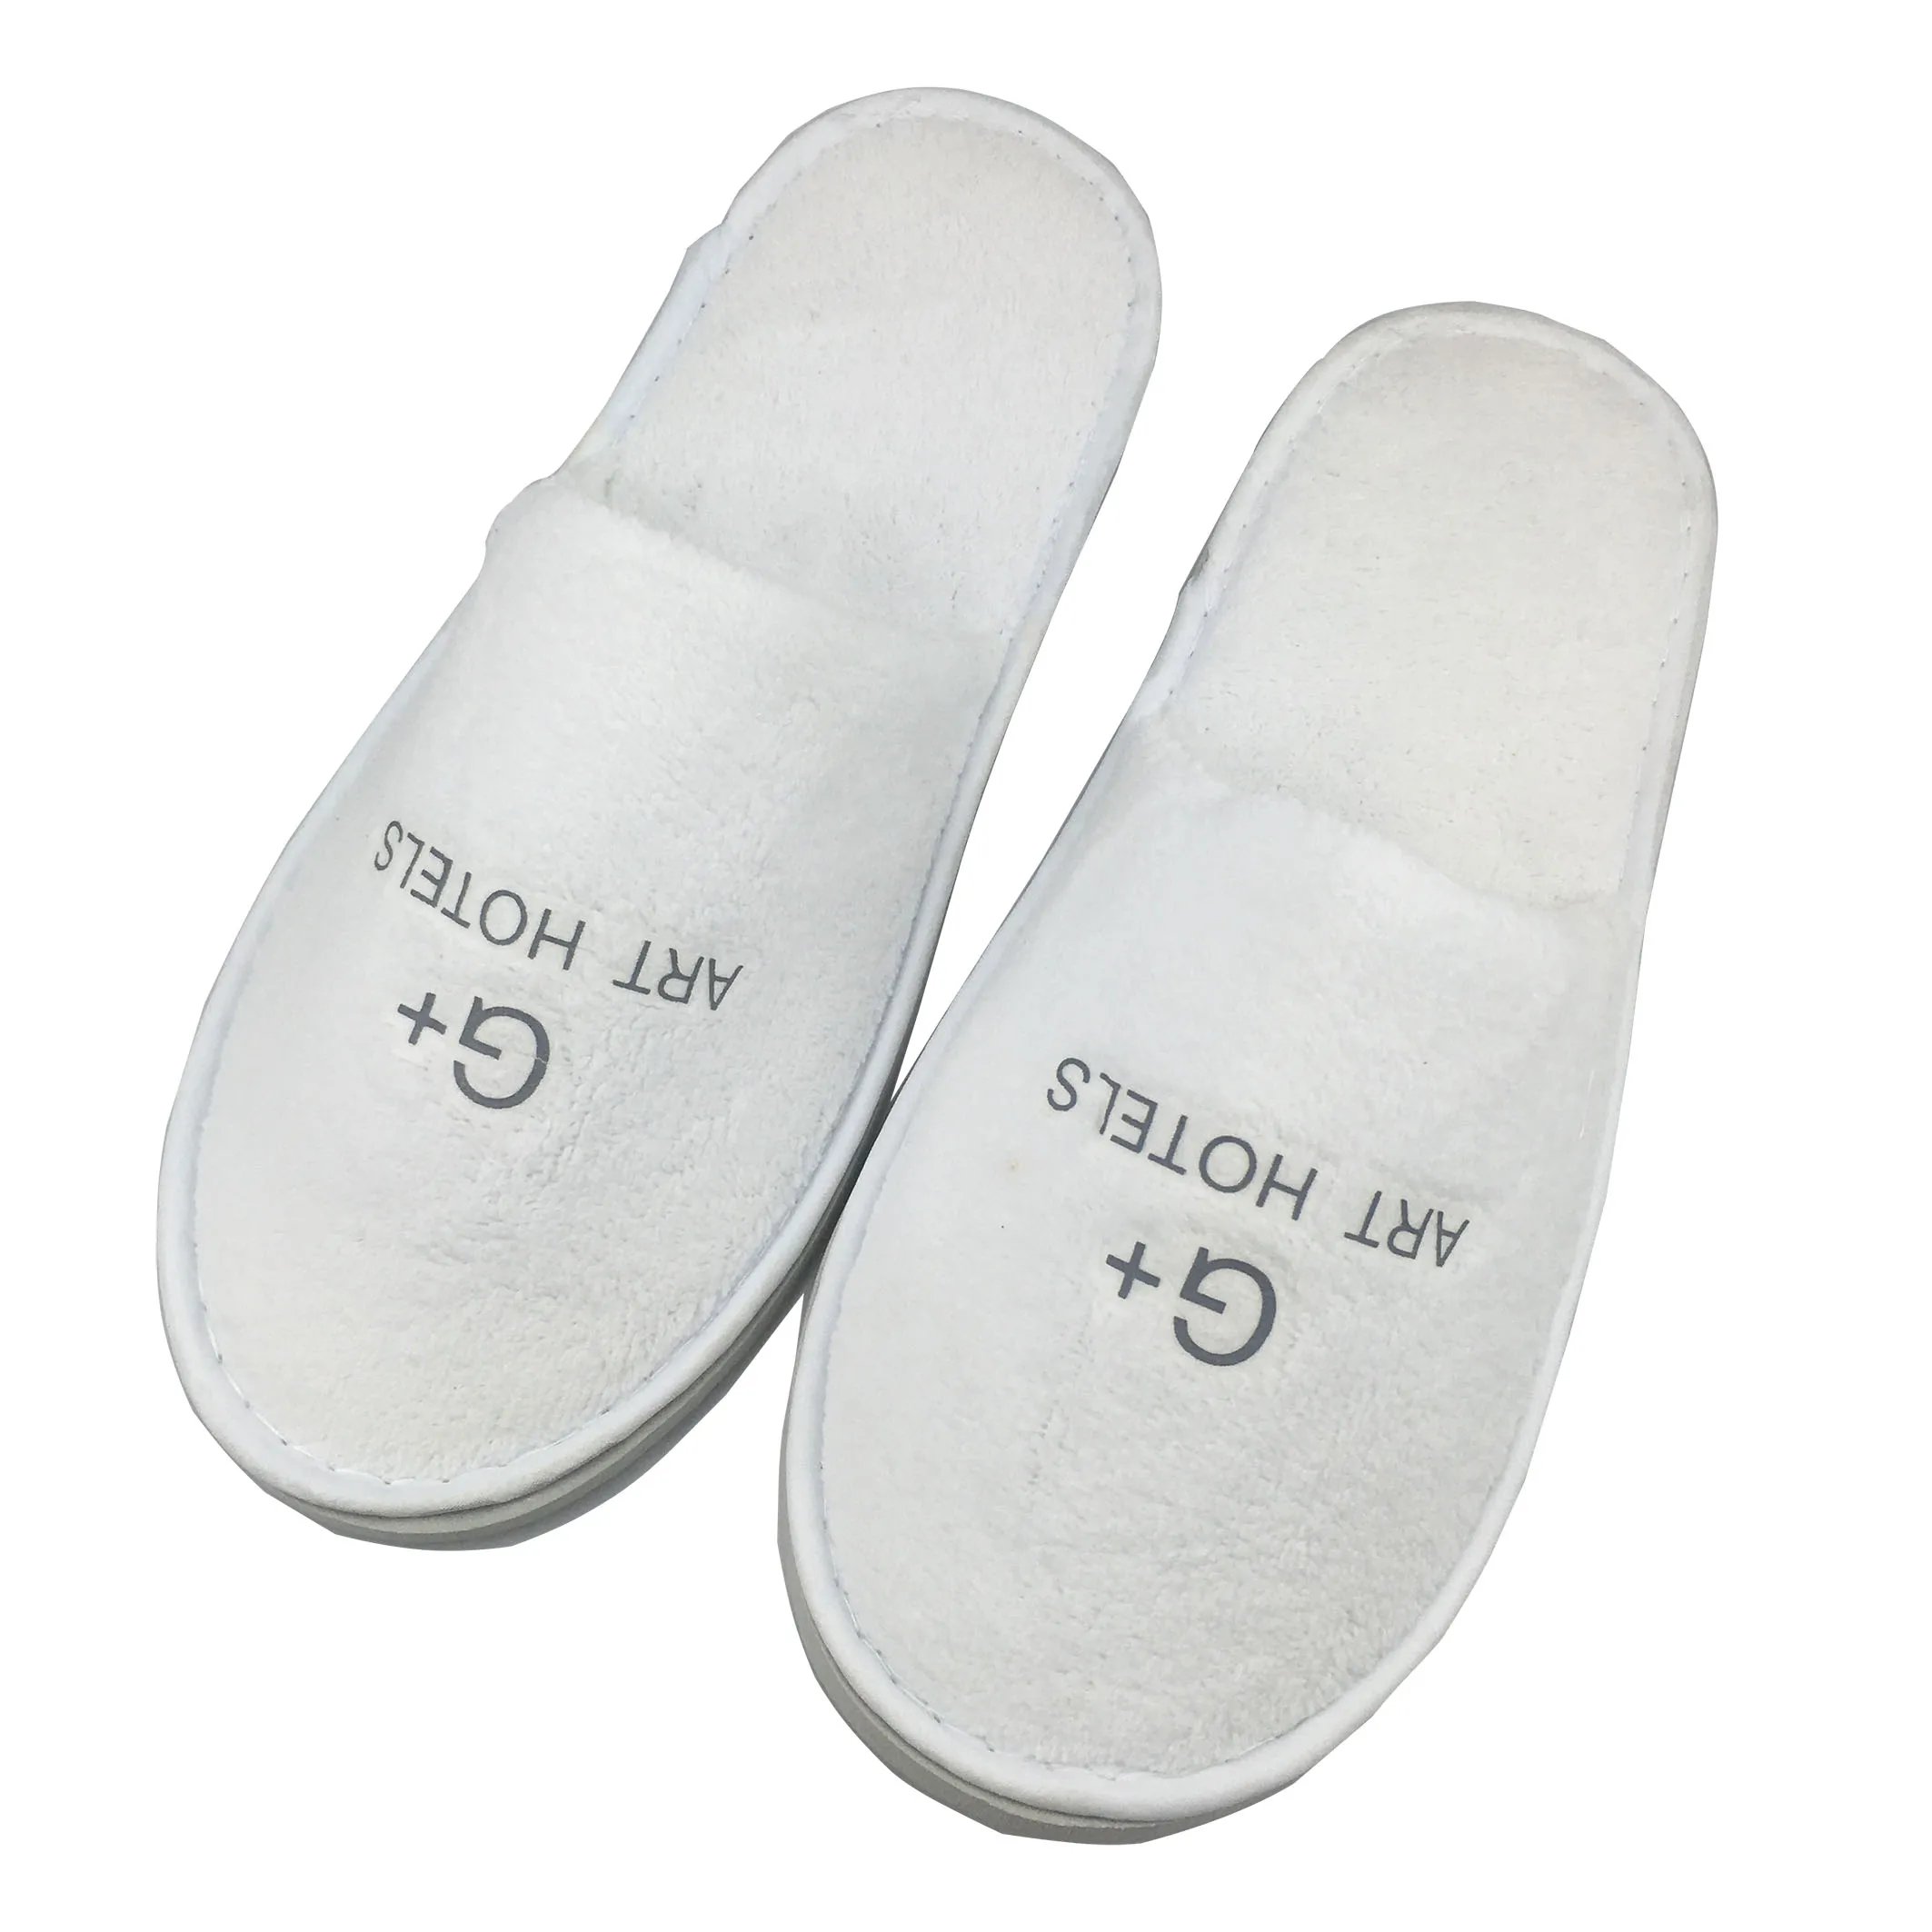 Wholesale Disposable Customized Hotel Slippers - Buy Slippers on Alibaba.com